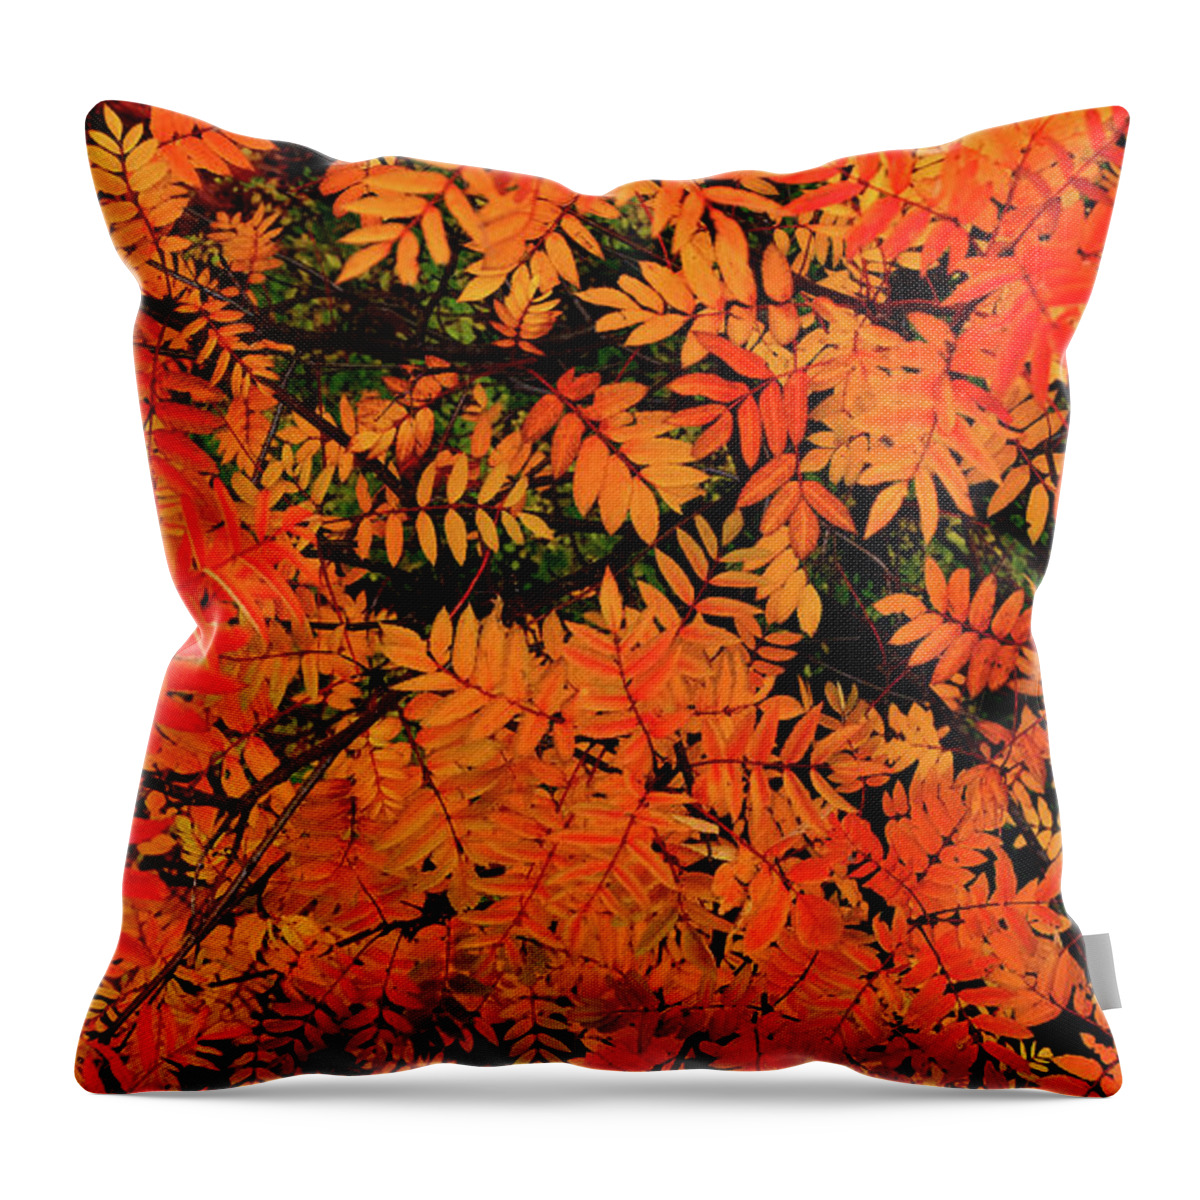  Throw Pillow featuring the digital art Autumn in Maple Creek by Darcy Dietrich